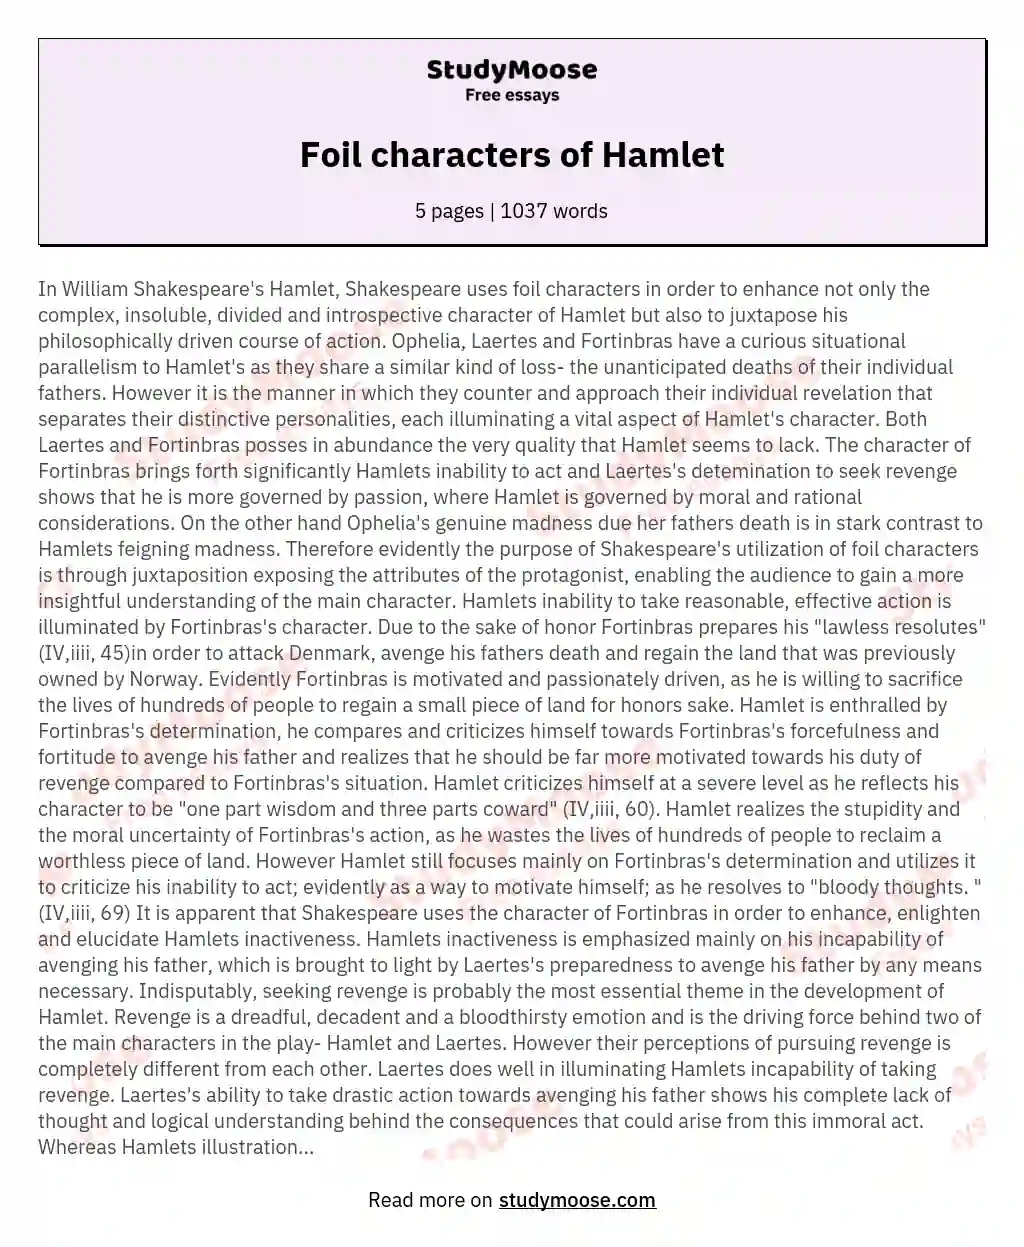 Foil characters of Hamlet